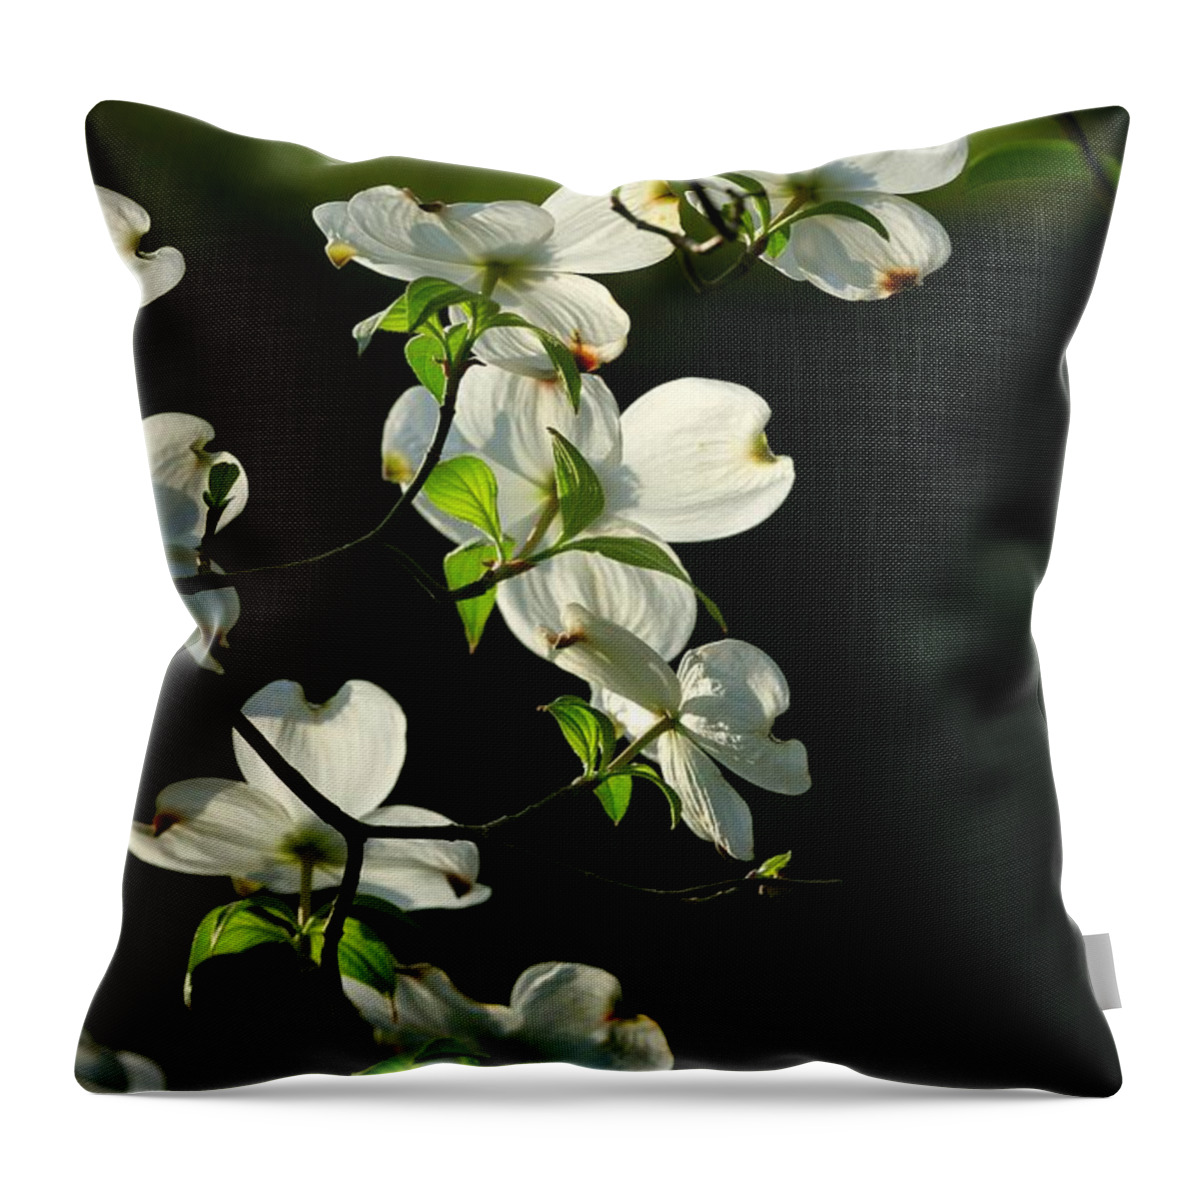 Dogwood Flowers Throw Pillow featuring the photograph Dogwood Retrospective by Michael Dougherty